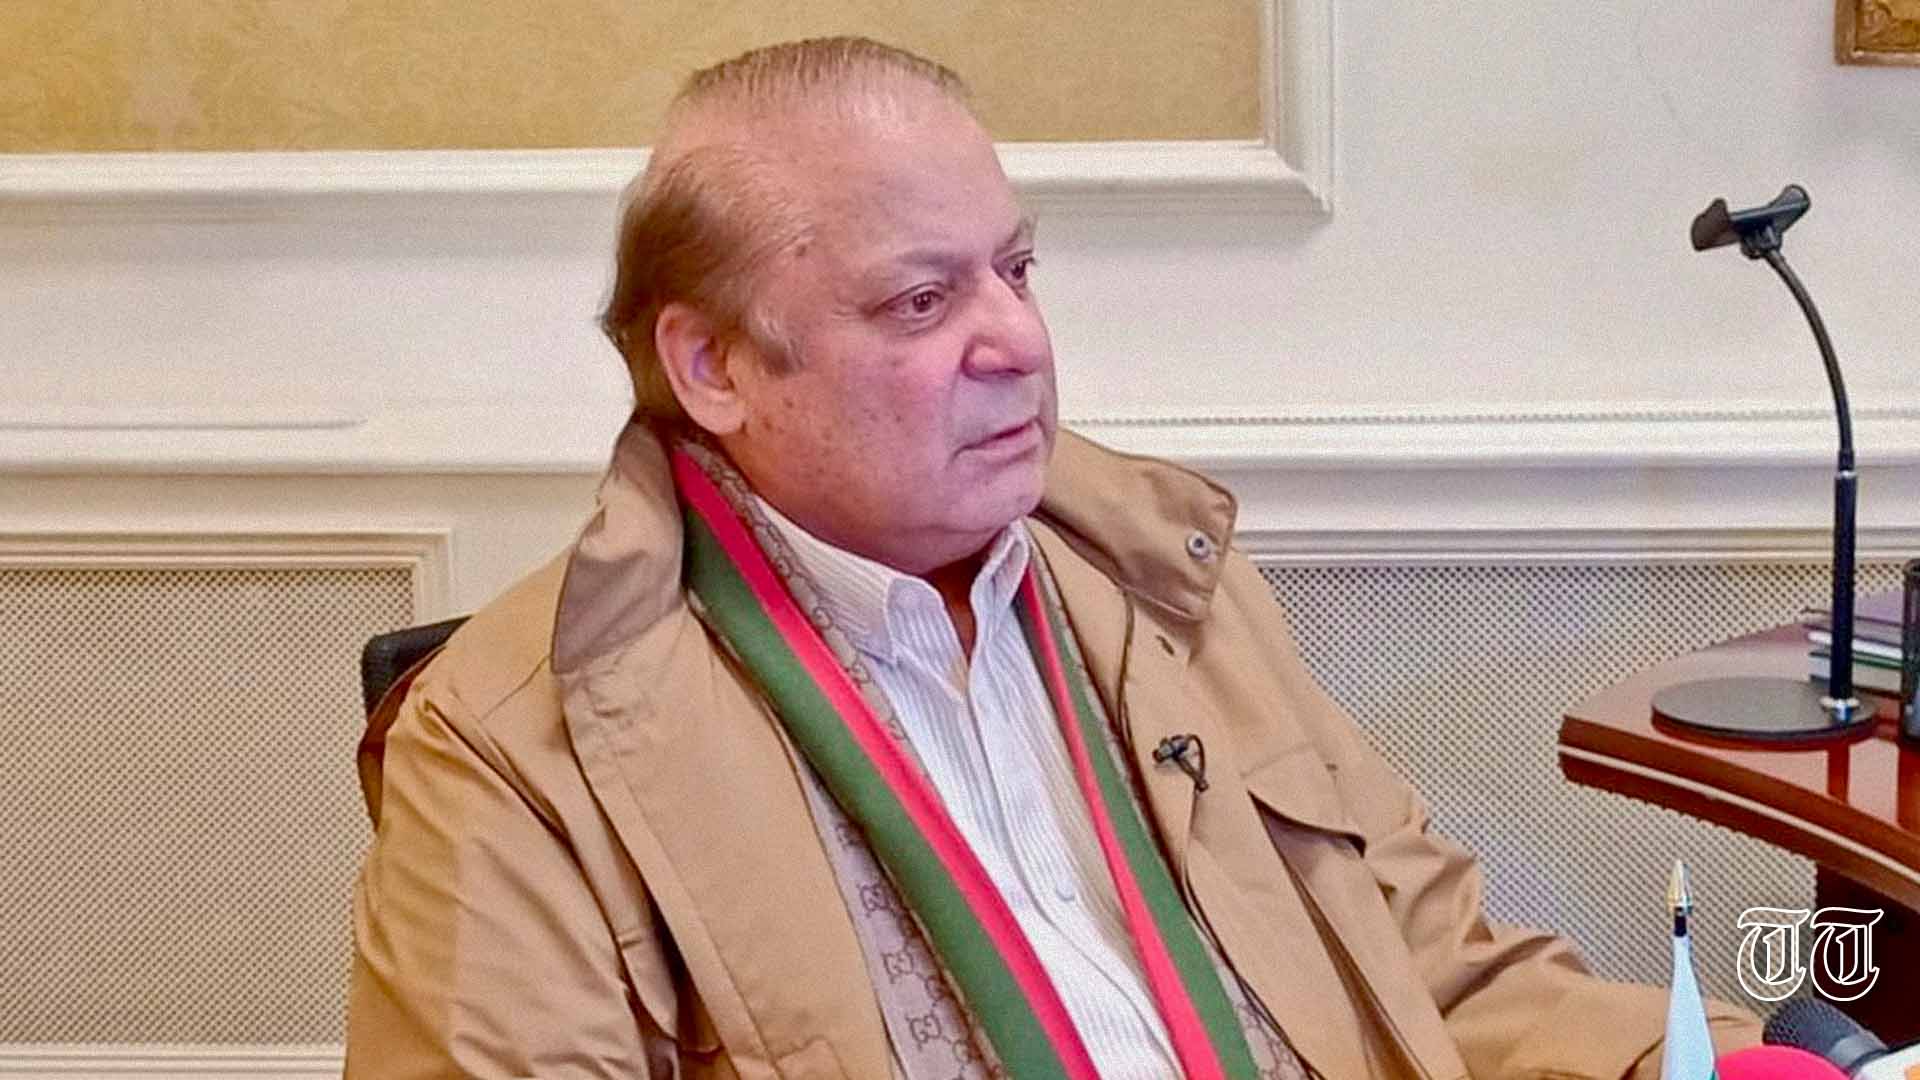 PML(N) chief Nawaz Sharif is shown addressing reporters from his offices in London. — FILE/THE THURSDAY TIMES